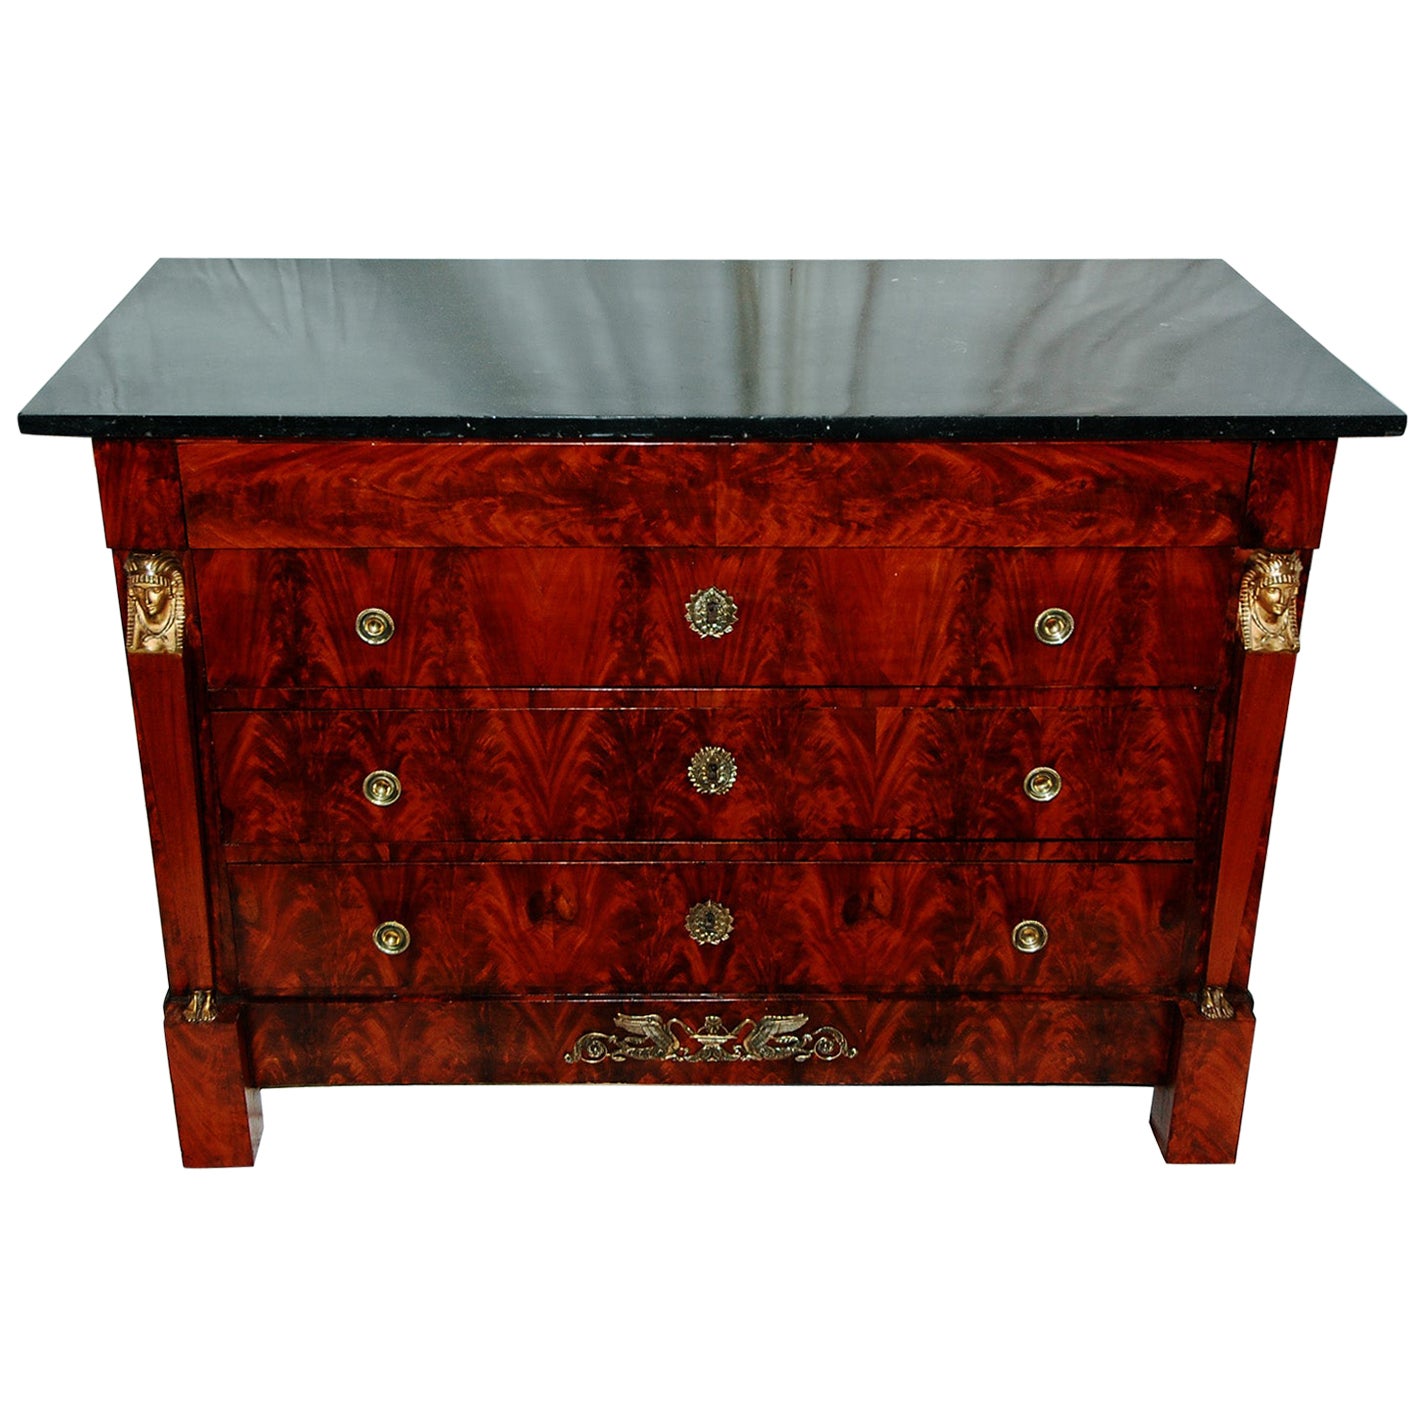 French Empire Period Flame Grain Mahogany Commode Chest with Black Marble Top For Sale